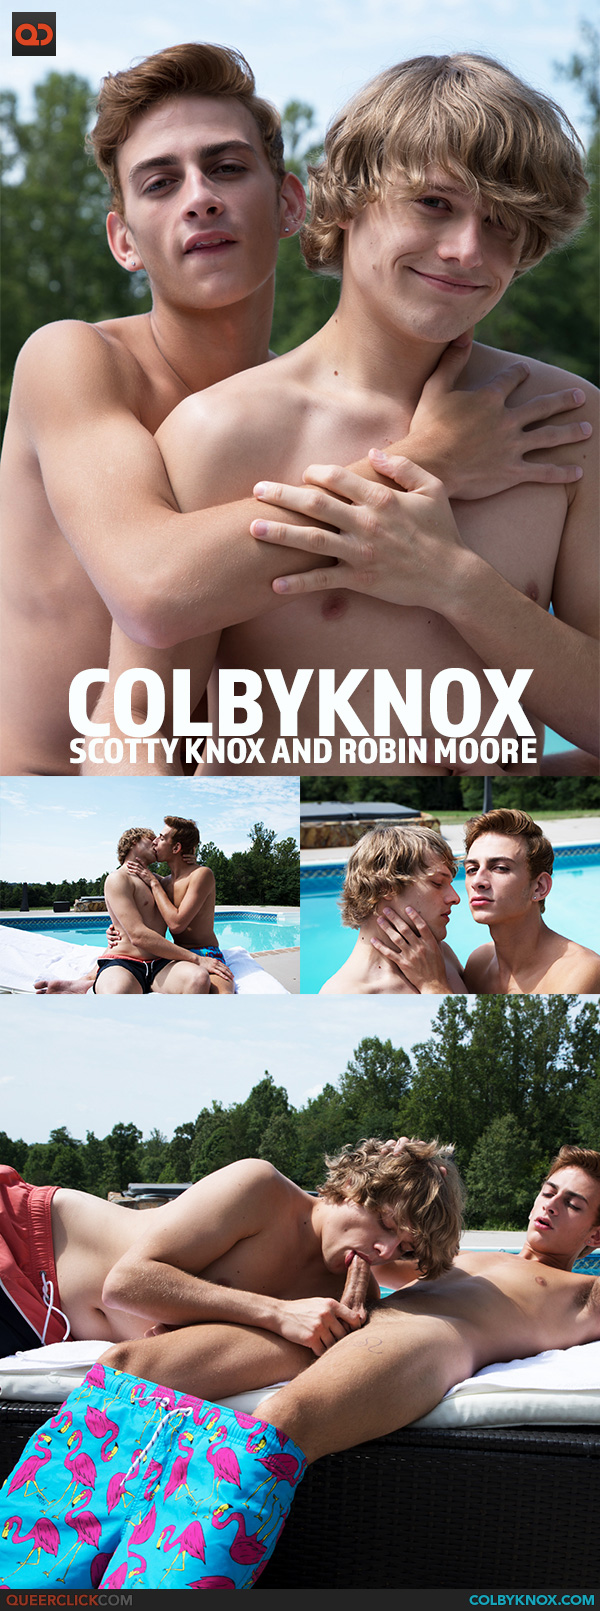 Colby Knox: Scotty Knox and Robin Moore